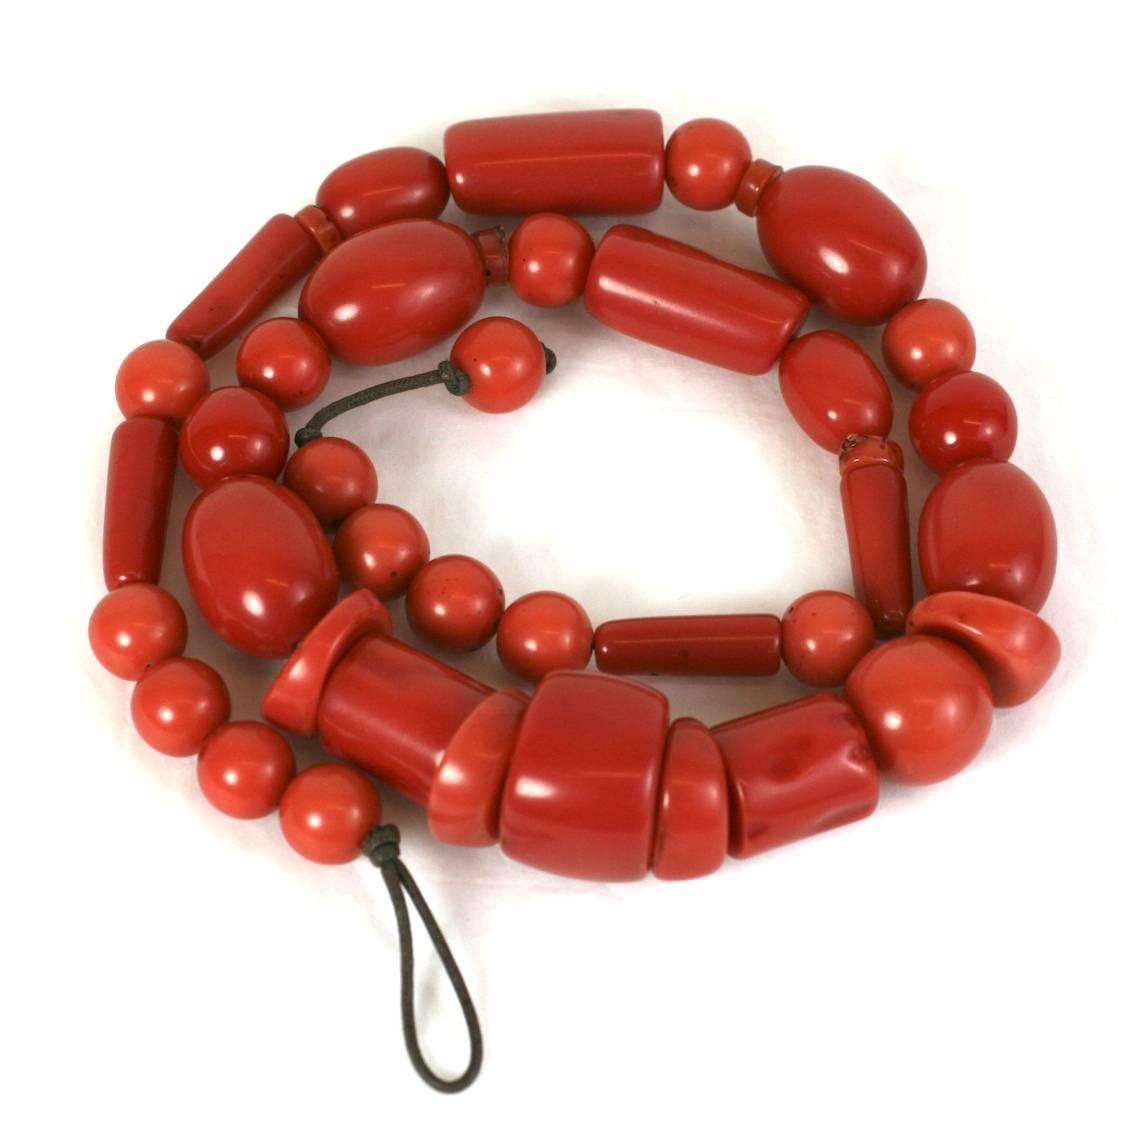 Monies style signature resin barbaric style, faux coral necklace of vari size polished and naturalistic beads  Strung on brown woven cotton cord with bead and self loop closure, 1990's, Unsigned.
Excellent Condition.
L 33.25